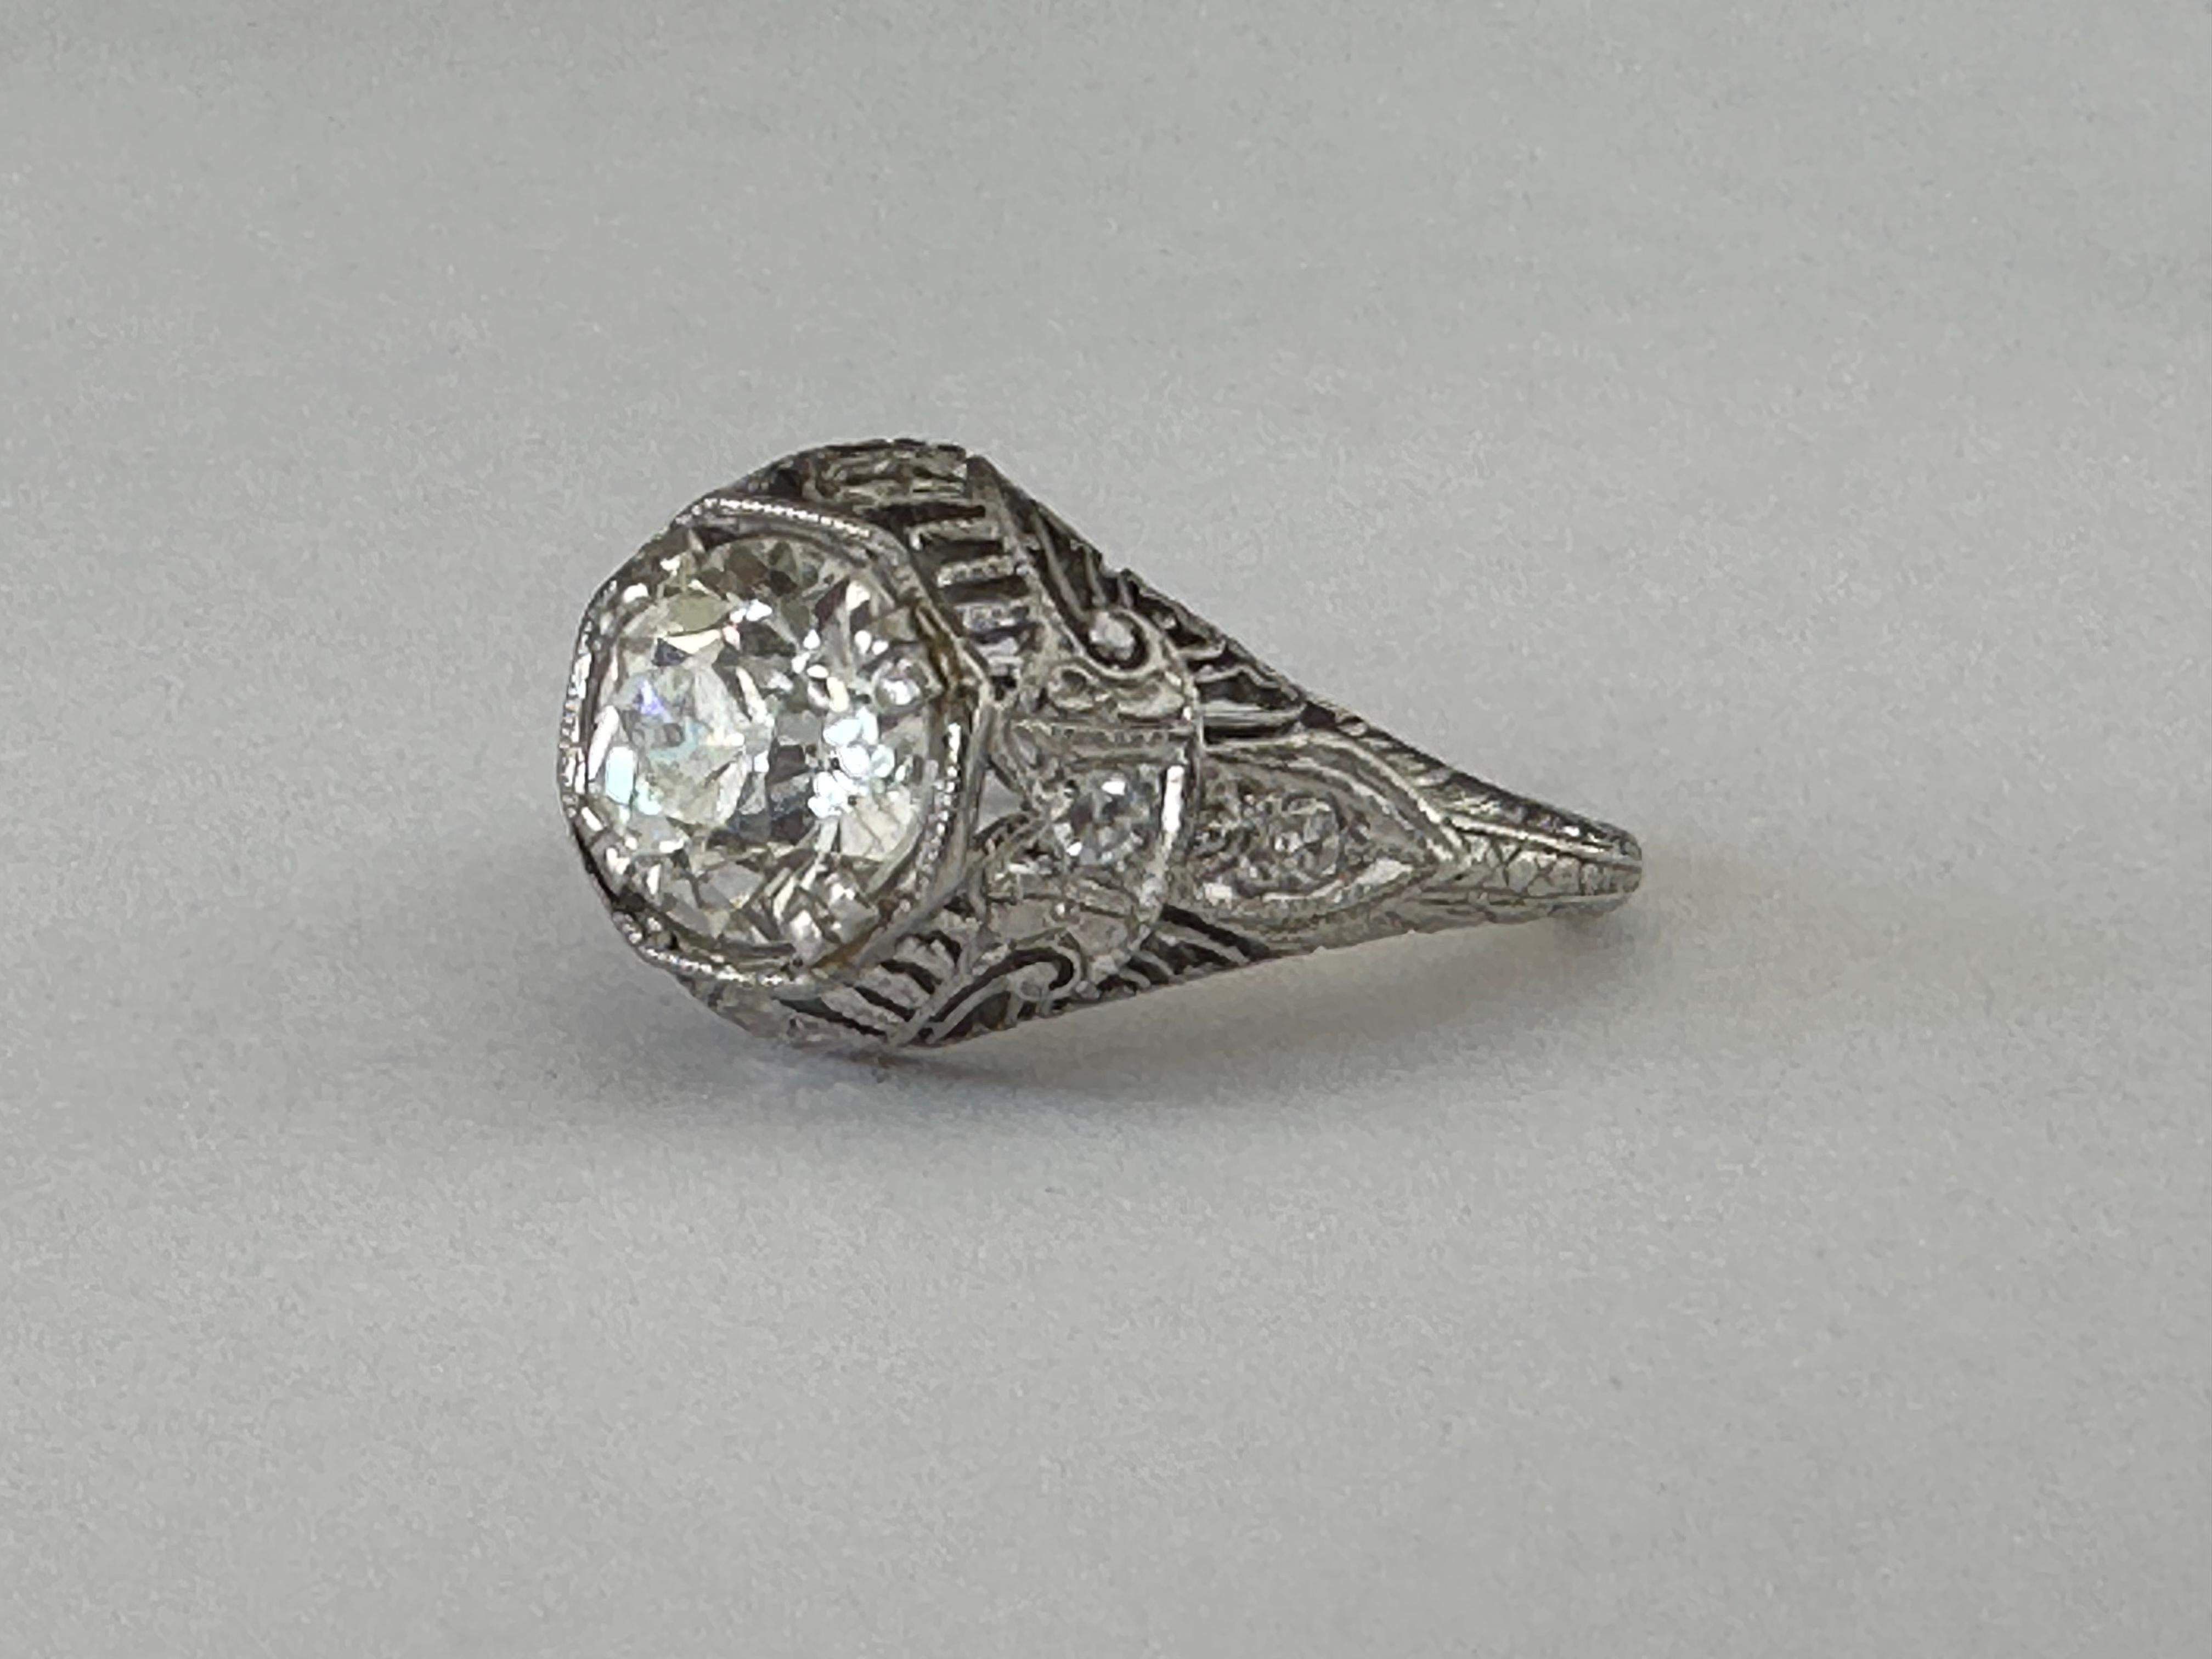 This stunning Art Deco ring handcrafted from platinum is designed around an Old European cut diamond center stone measuring approximately 1.00 carat, H-I color, SI clarity and accented with four single cut diamonds totaling approximately 0.05 carats